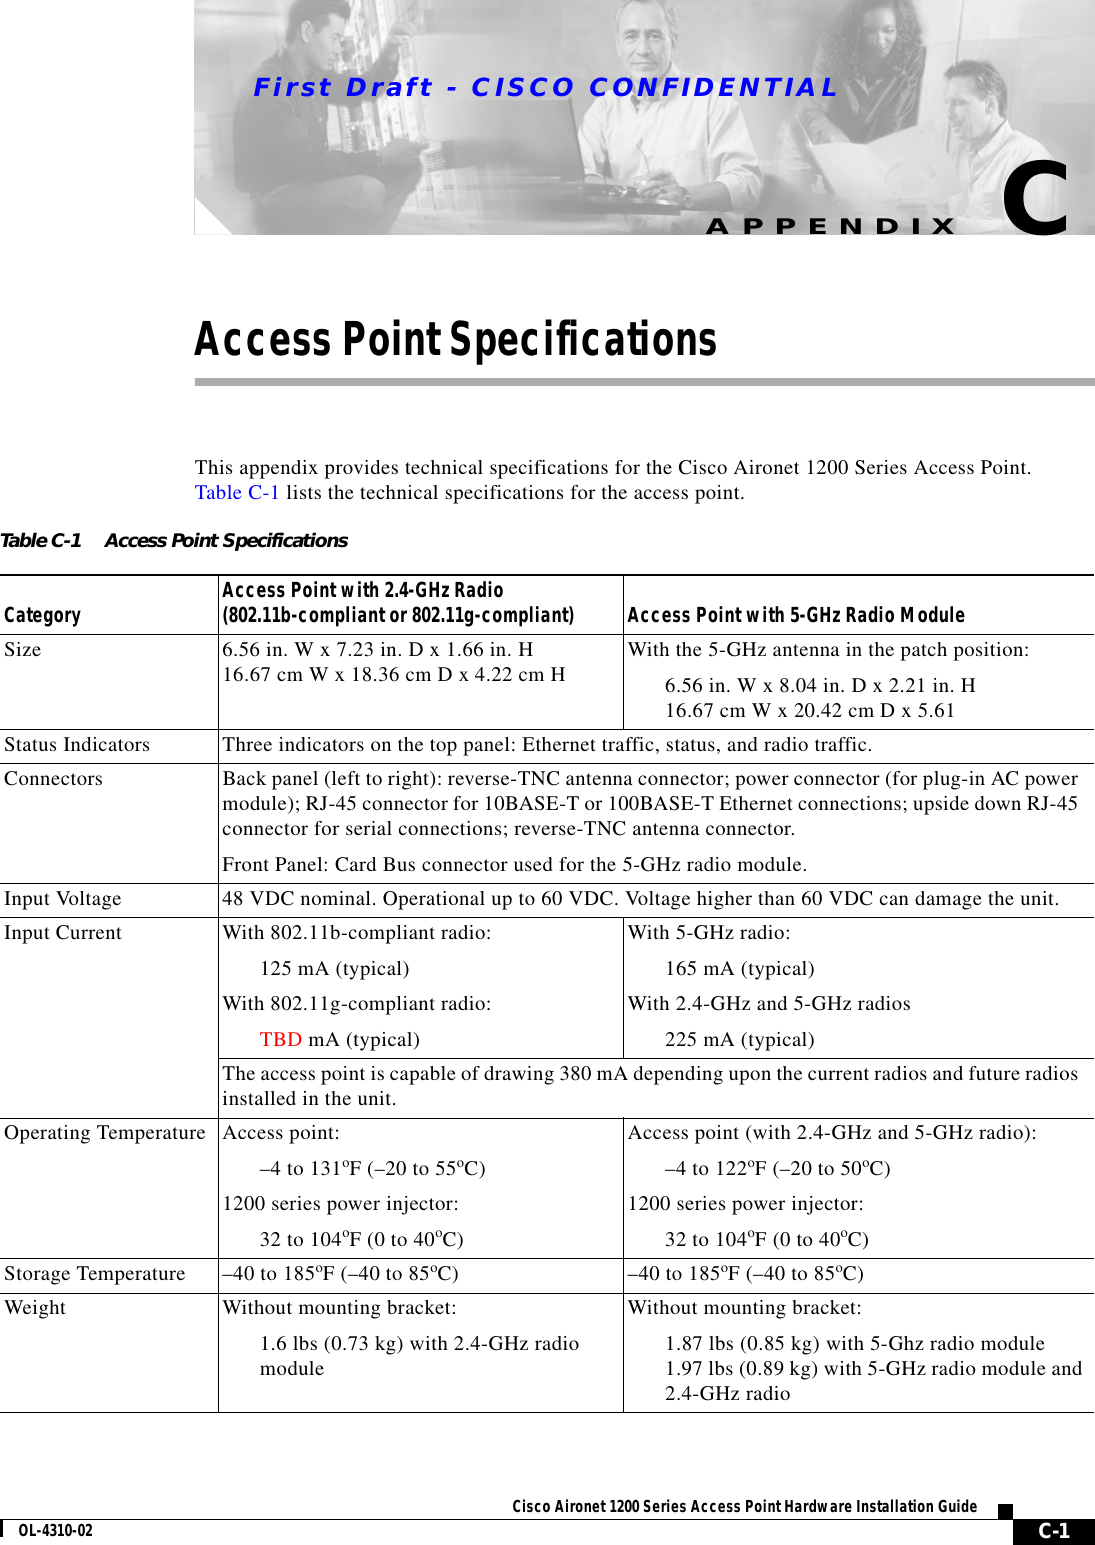 First Draft - CISCO CONFIDENTIALC-1Cisco Aironet 1200 Series Access Point Hardware Installation GuideOL-4310-02APPENDIXCAccess Point SpecificationsThis appendix provides technical specifications for the Cisco Aironet 1200 Series Access Point. Table C-1 lists the technical specifications for the access point. Table C-1 Access Point SpecificationsCategory Access Point with 2.4-GHz Radio(802.11b-compliant or 802.11g-compliant)  Access Point with 5-GHz Radio ModuleSize 6.56 in. W x 7.23 in. D x 1.66 in. H16.67 cm W x 18.36 cm D x 4.22 cm H  With the 5-GHz antenna in the patch position:6.56 in. W x 8.04 in. D x 2.21 in. H 16.67 cm W x 20.42 cm D x 5.61Status Indicators Three indicators on the top panel: Ethernet traffic, status, and radio traffic.Connectors Back panel (left to right): reverse-TNC antenna connector; power connector (for plug-in AC power module); RJ-45 connector for 10BASE-T or 100BASE-T Ethernet connections; upside down RJ-45 connector for serial connections; reverse-TNC antenna connector.Front Panel: Card Bus connector used for the 5-GHz radio module.Input Voltage  48 VDC nominal. Operational up to 60 VDC. Voltage higher than 60 VDC can damage the unit.Input Current With 802.11b-compliant radio:125 mA (typical)With 802.11g-compliant radio:TBD mA (typical)With 5-GHz radio:165 mA (typical) With 2.4-GHz and 5-GHz radios225 mA (typical) The access point is capable of drawing 380 mA depending upon the current radios and future radios installed in the unit.Operating Temperature Access point:–4 to 131oF (–20 to 55oC) 1200 series power injector:32 to 104oF (0 to 40oC) Access point (with 2.4-GHz and 5-GHz radio):–4 to 122oF (–20 to 50oC) 1200 series power injector:32 to 104oF (0 to 40oC)Storage Temperature  –40 to 185oF (–40 to 85oC)  –40 to 185oF (–40 to 85oC) Weight Without mounting bracket:1.6 lbs (0.73 kg) with 2.4-GHz radiomoduleWithout mounting bracket:1.87 lbs (0.85 kg) with 5-Ghz radio module1.97 lbs (0.89 kg) with 5-GHz radio module and2.4-GHz radio